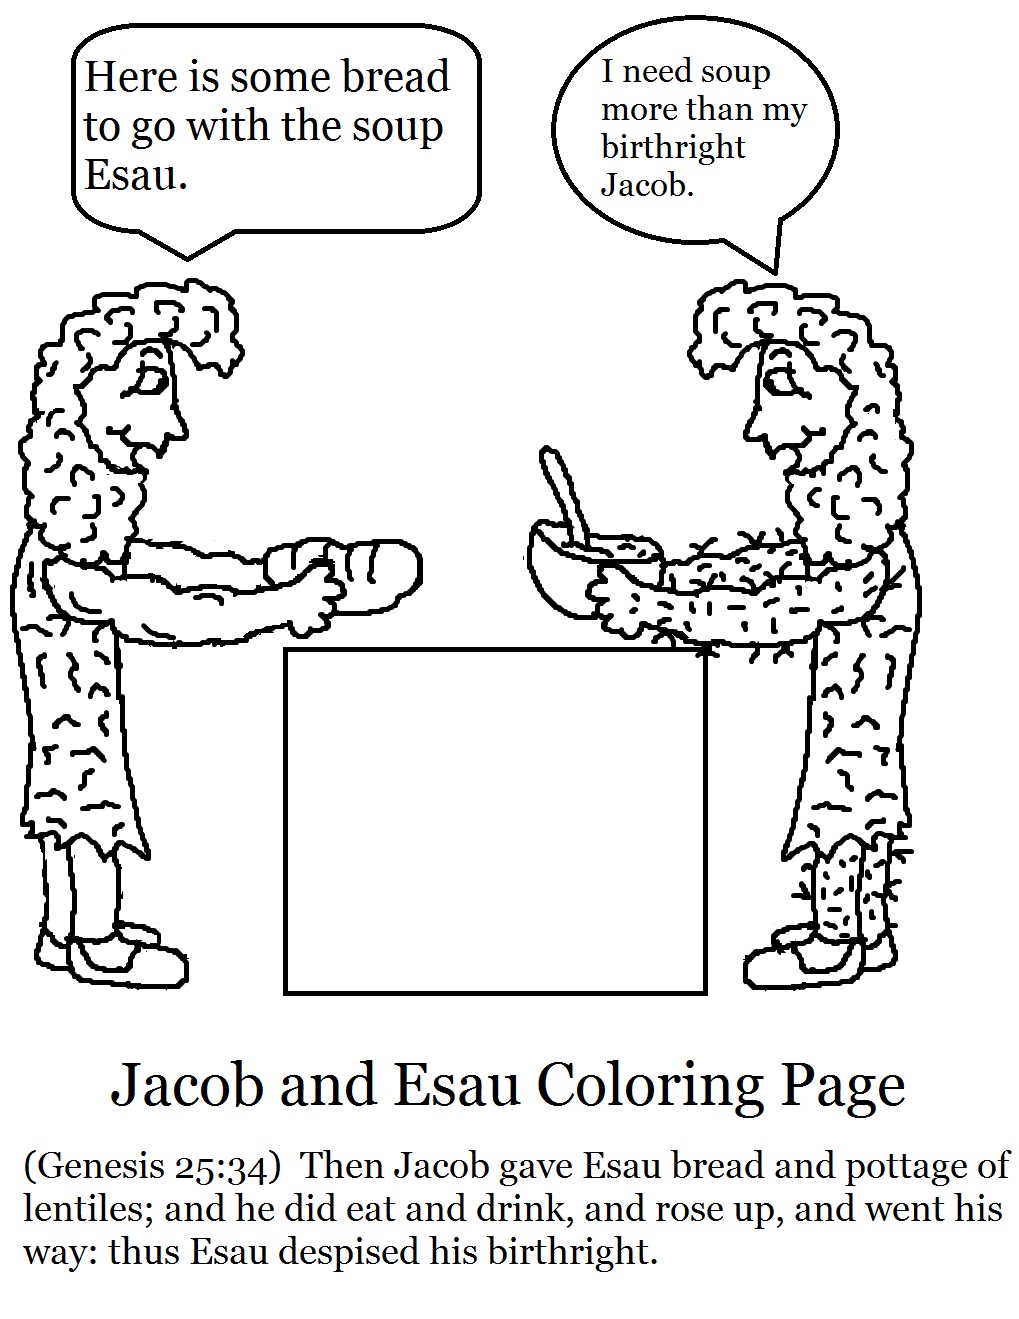 jacob and esau coloring pages photos - photo #37